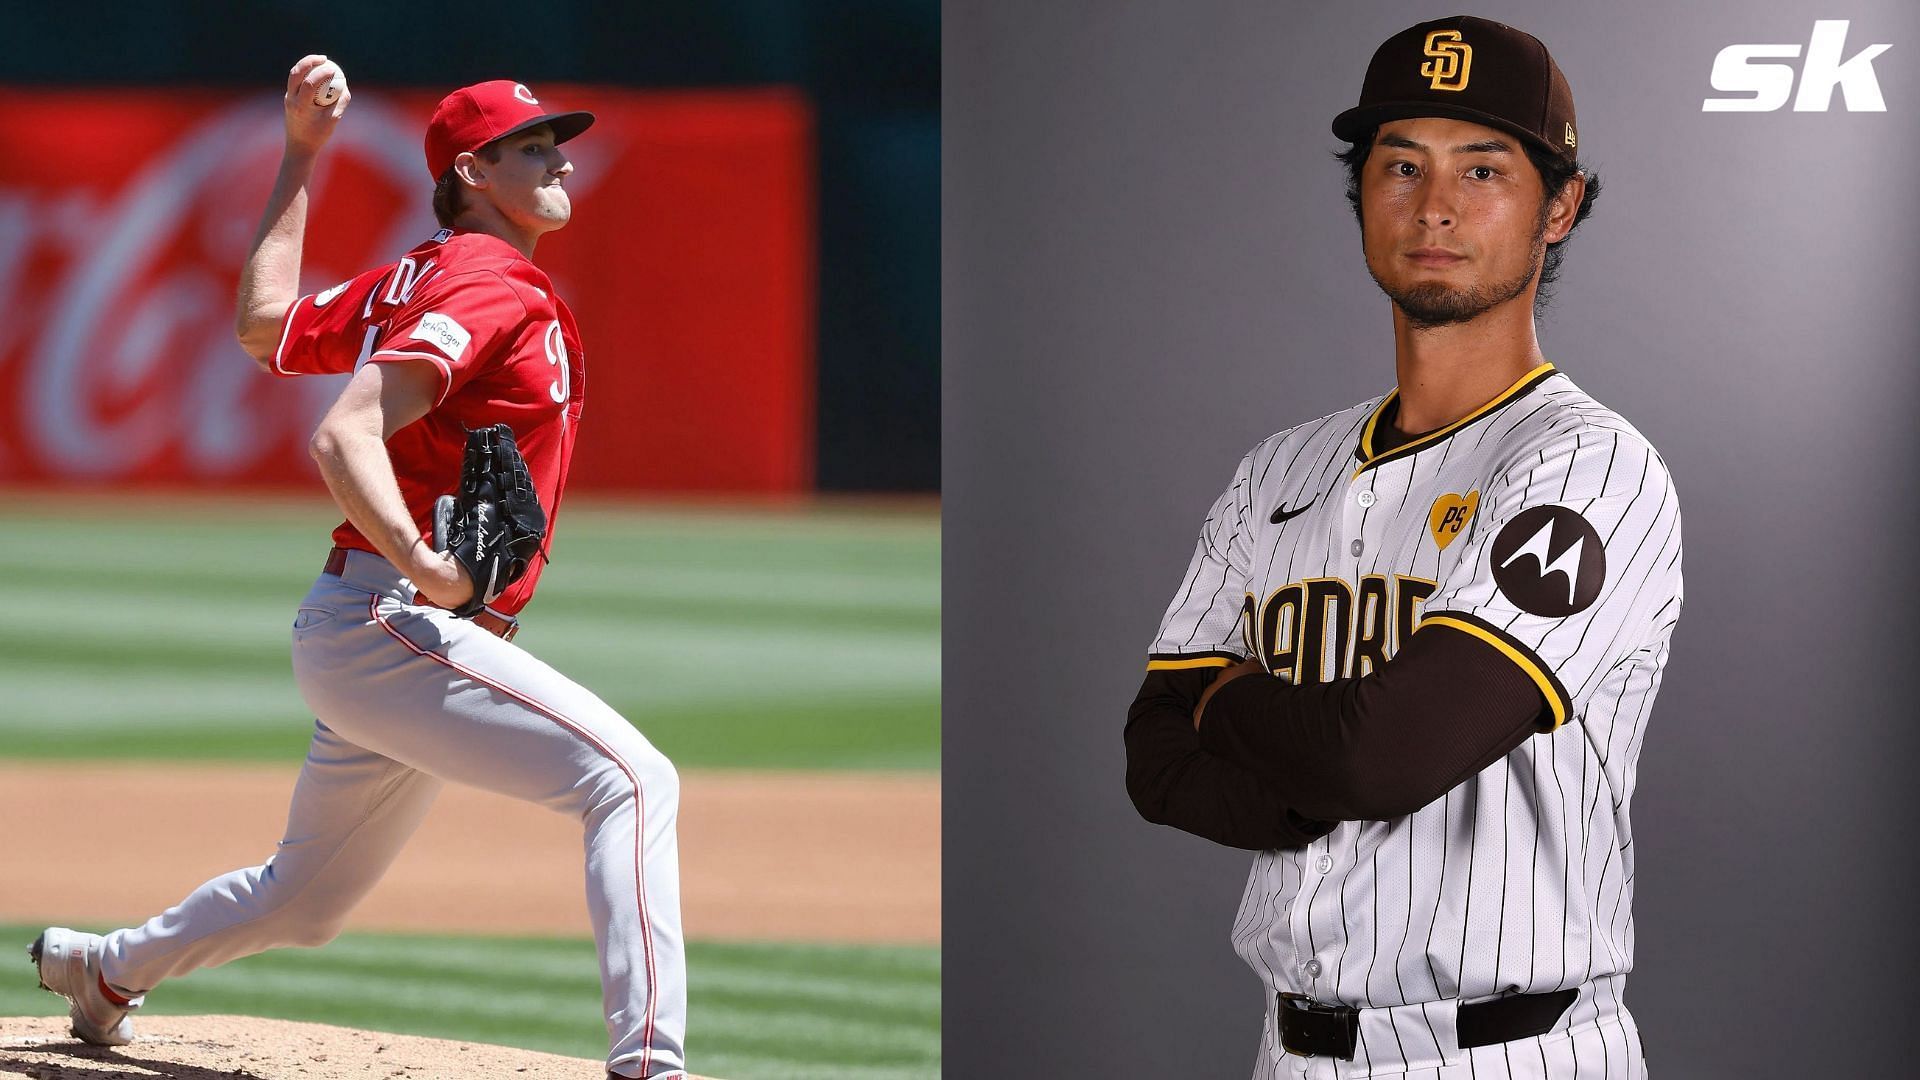 Nick Lodolo is a worthy fantasy baseball replacement for Yu Darvish following placement on IL